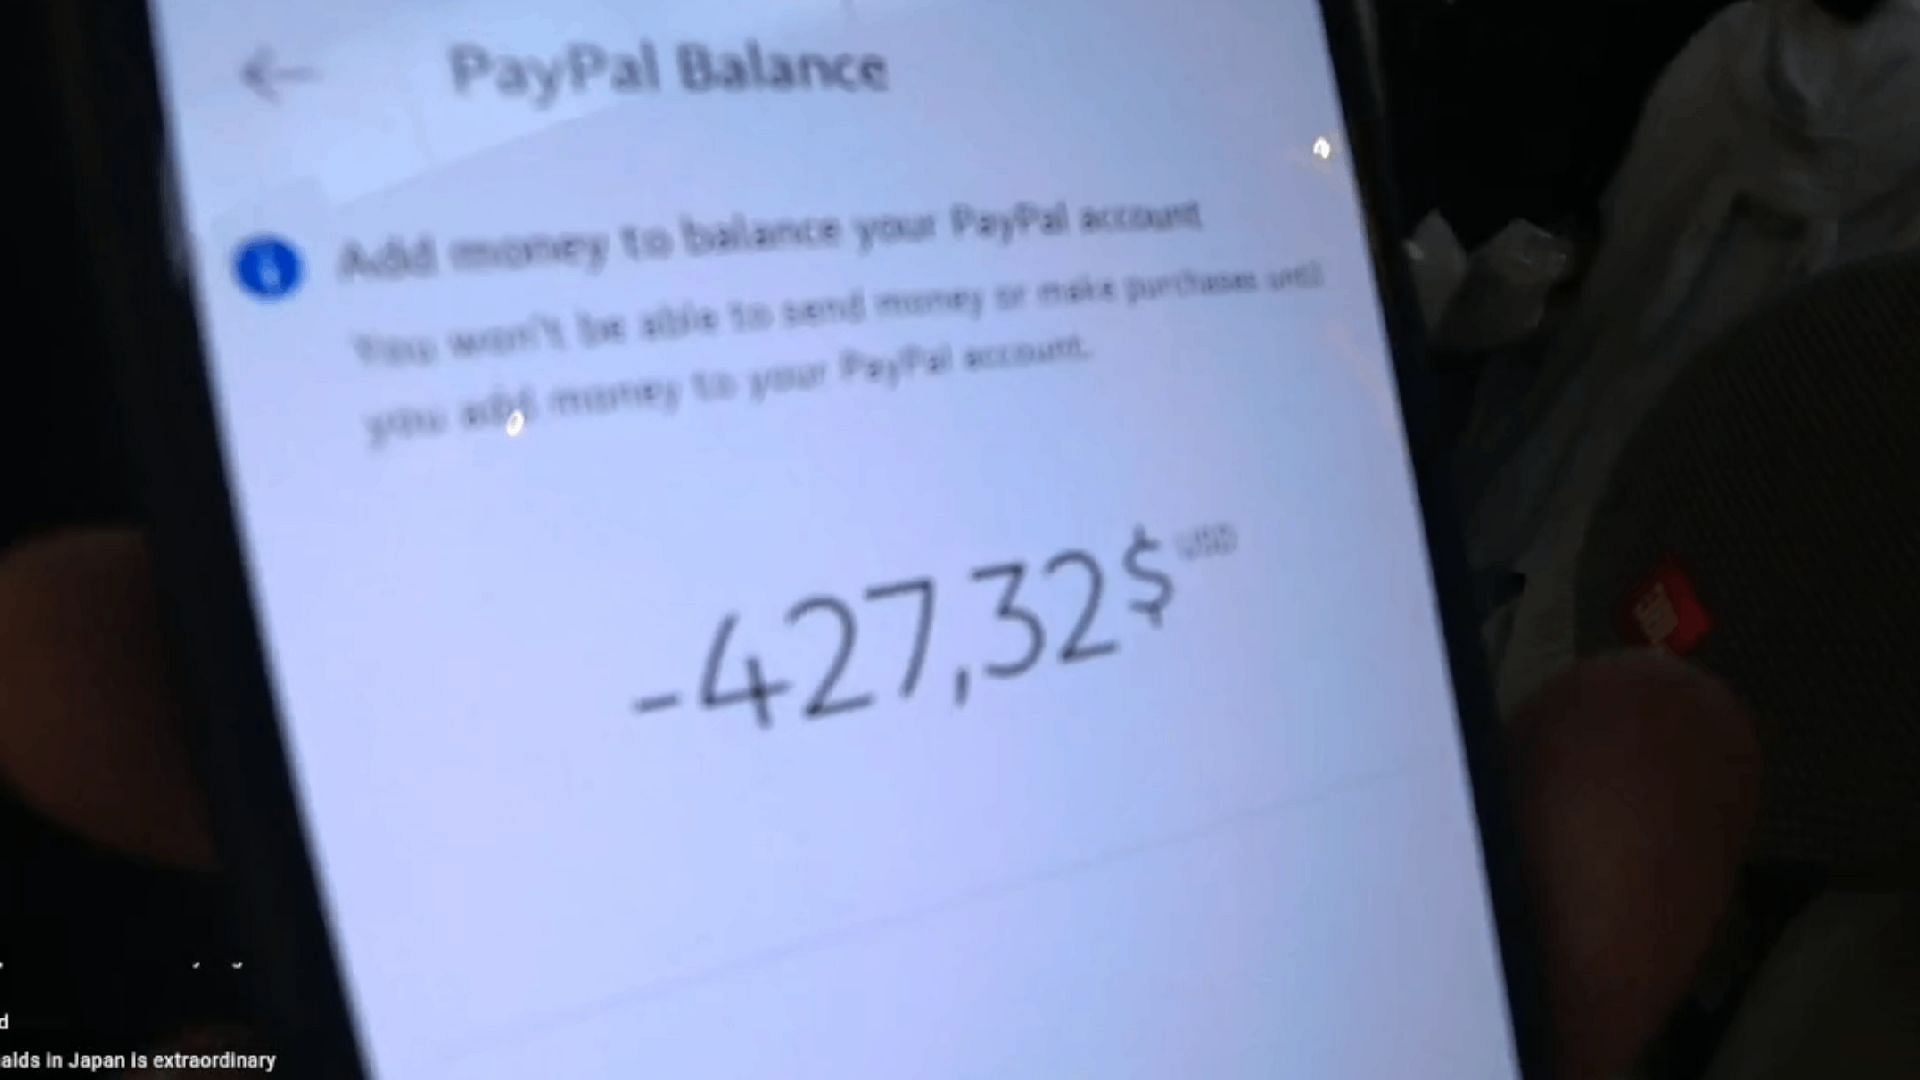 Kris showcases the money he had in his PayPal balance. (Image via RelicKris/Twitch)